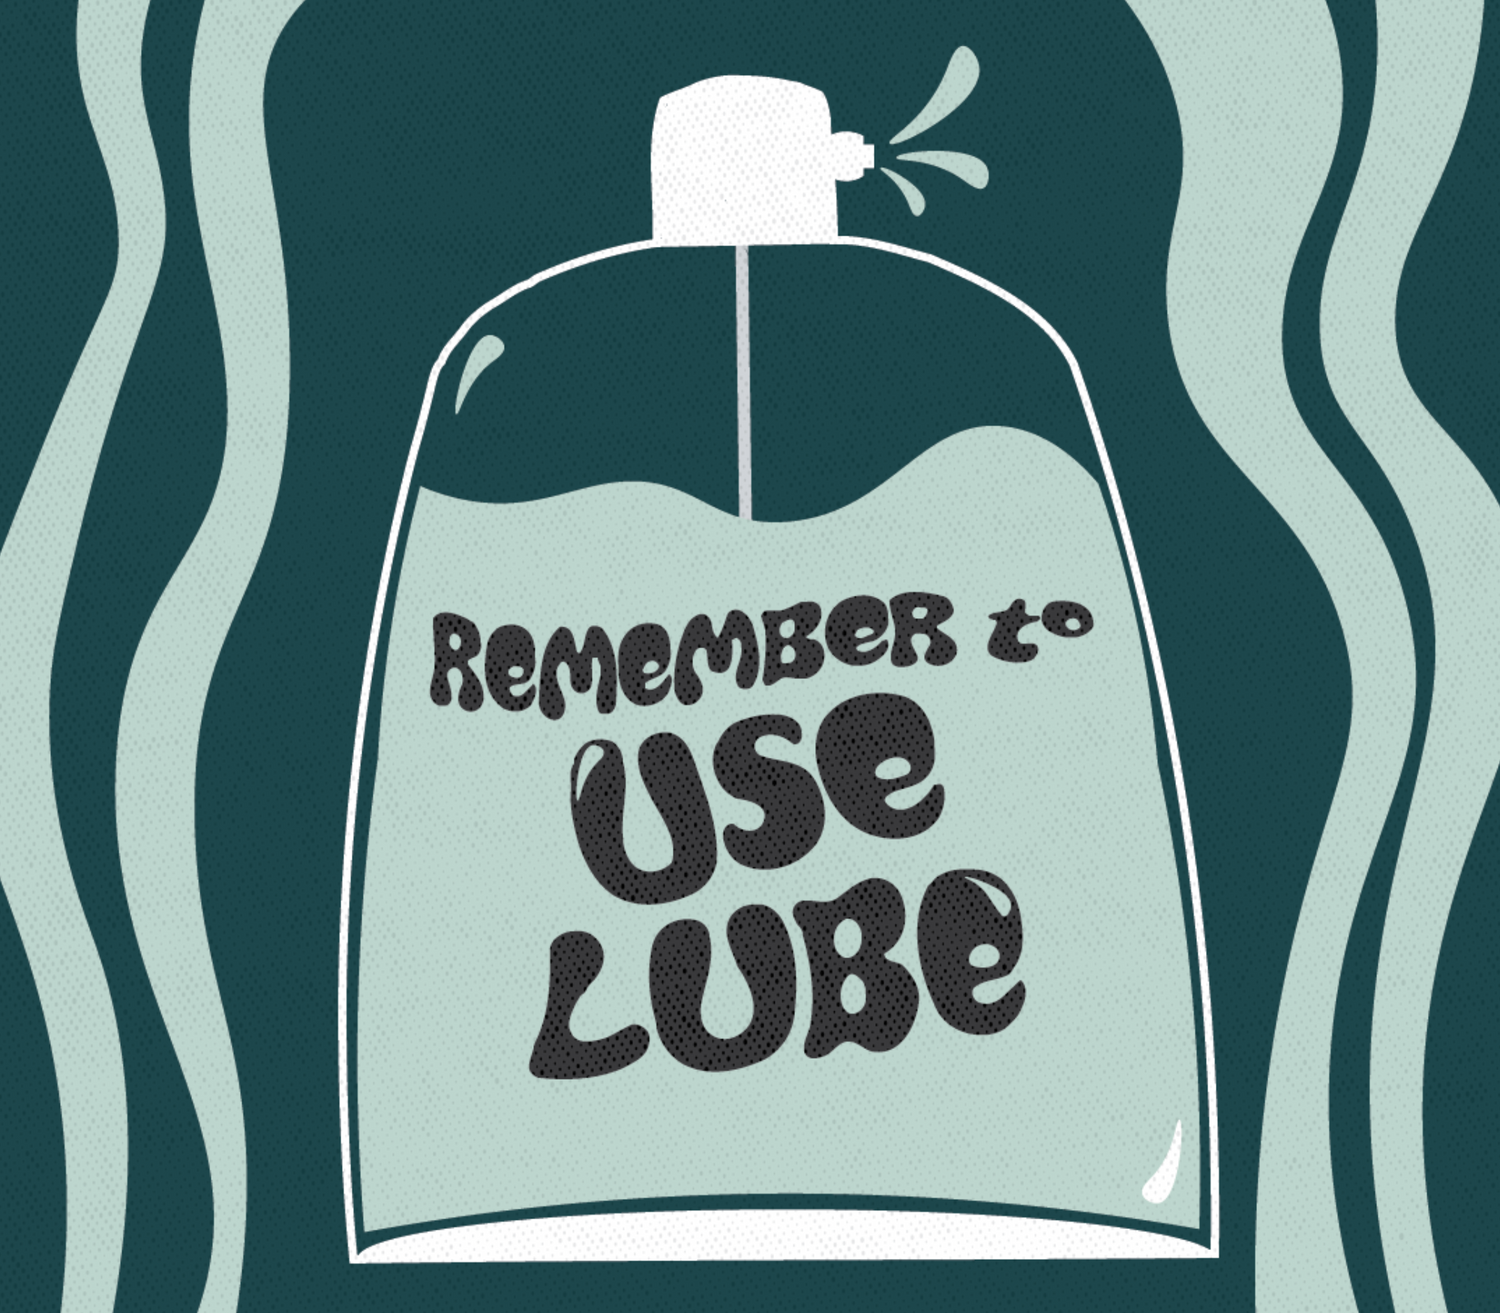 The Definitive Guide to Lube